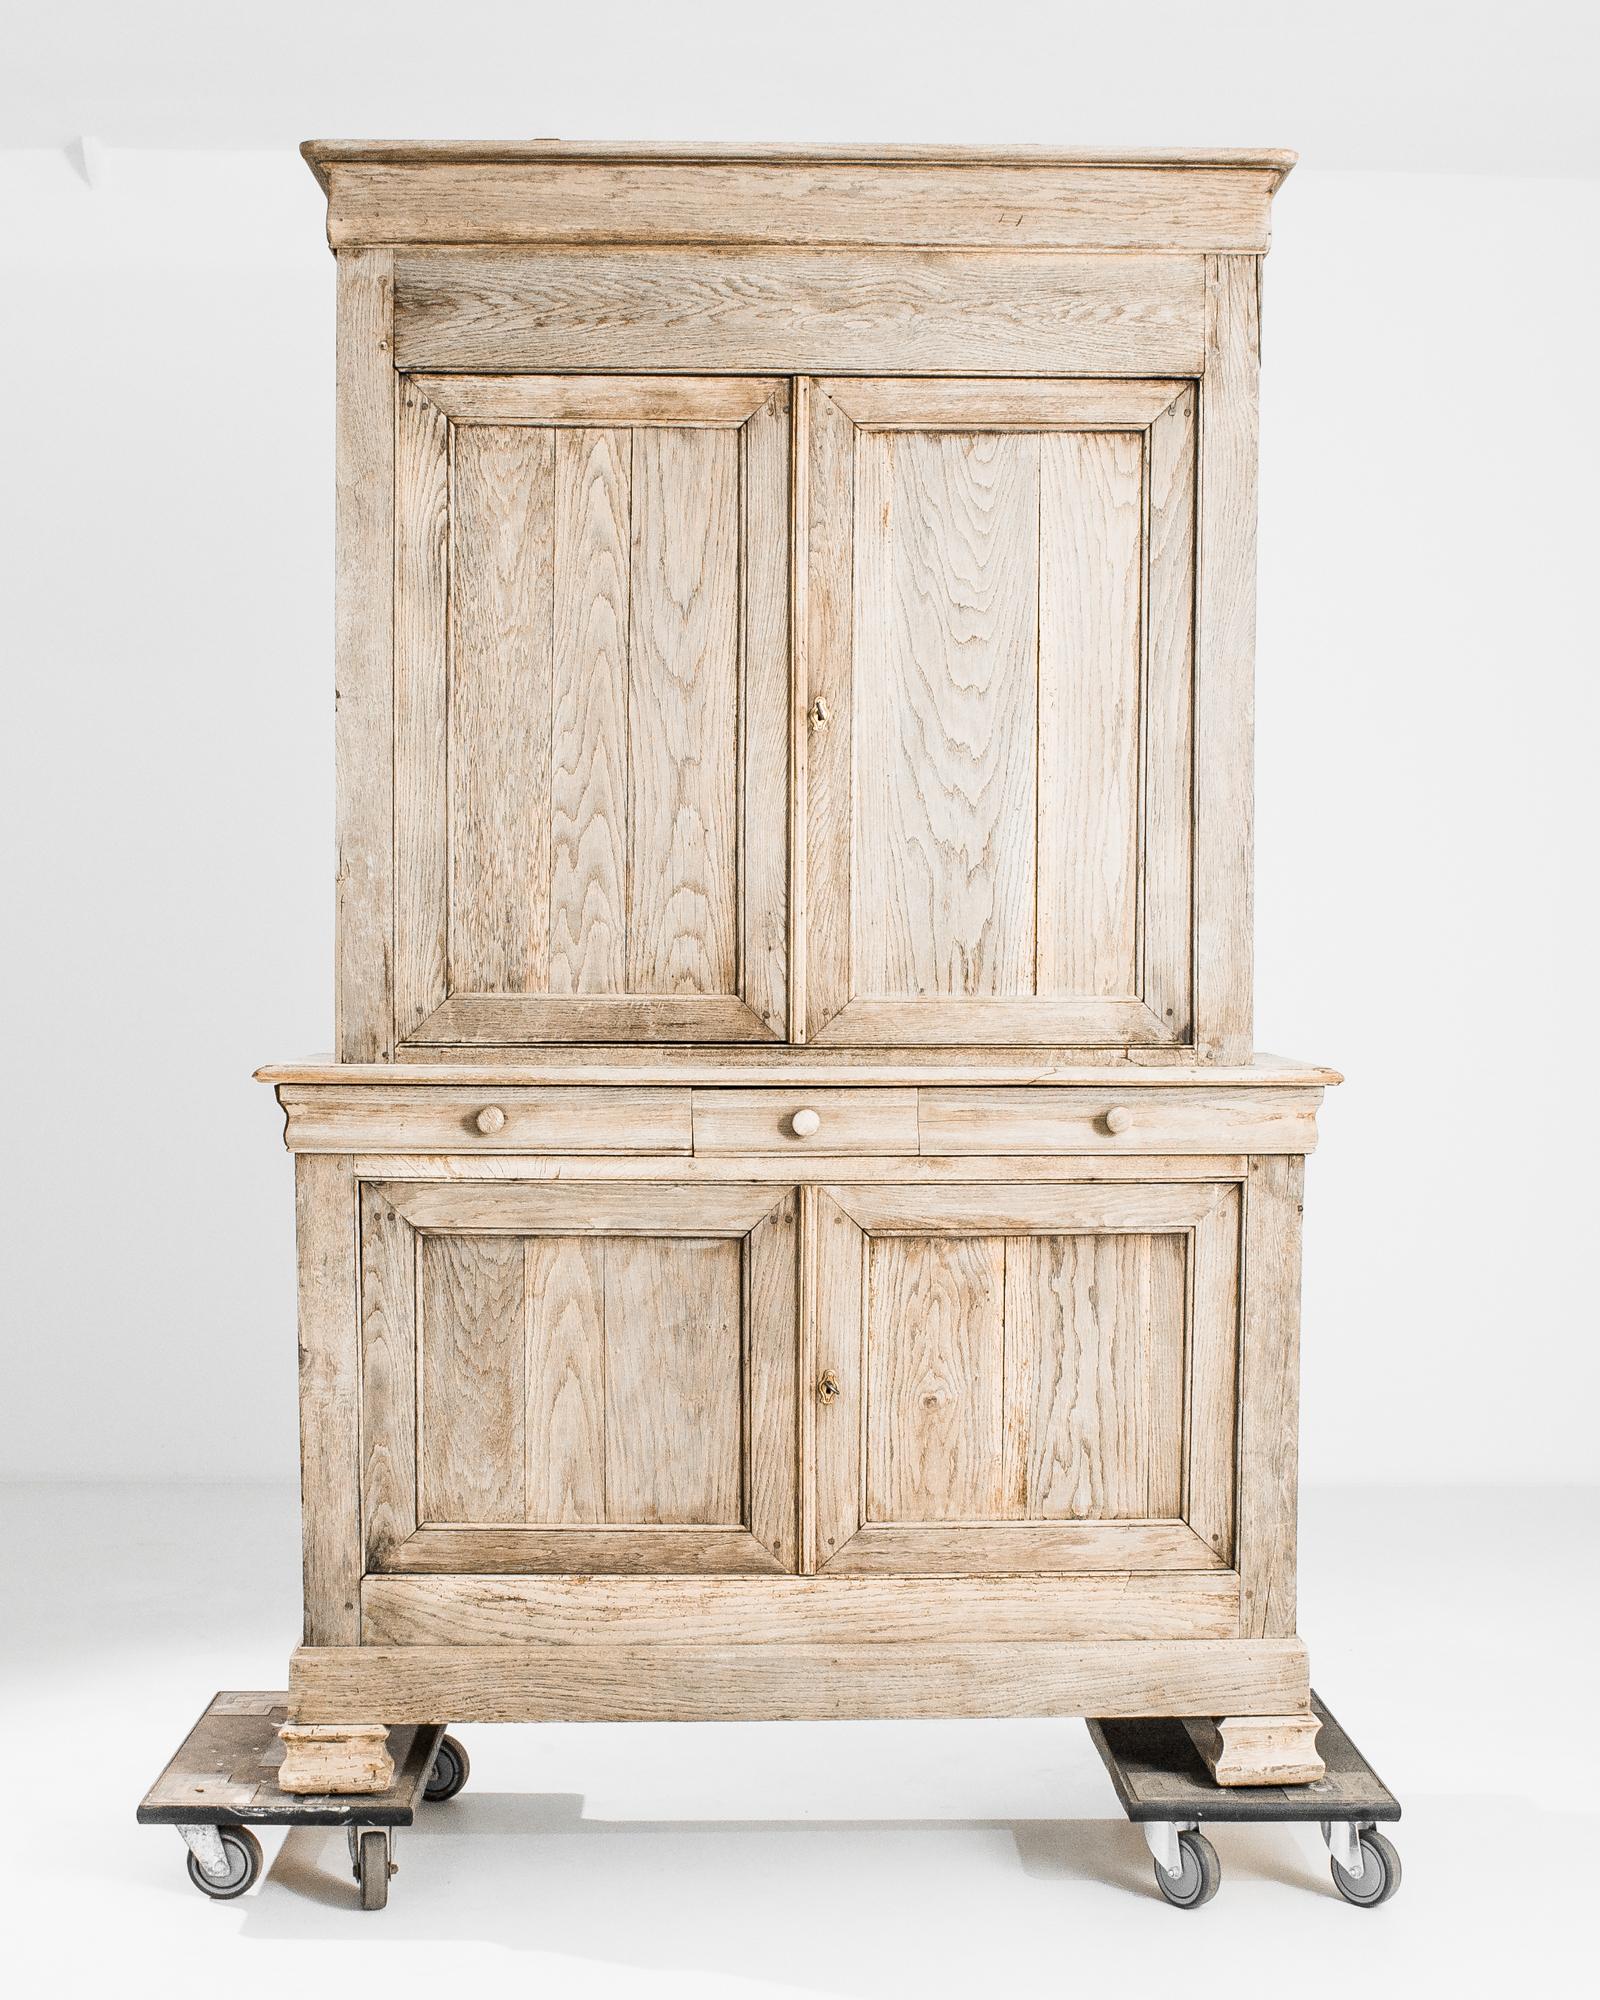 A bleached oak cabinet from France, produced circa 1880. A stately chest standing seven feet tall, this piece features an upper, locking, double door cabinet of three shelves, a lower double cabinet of two shelves, and a bifurcating row of three